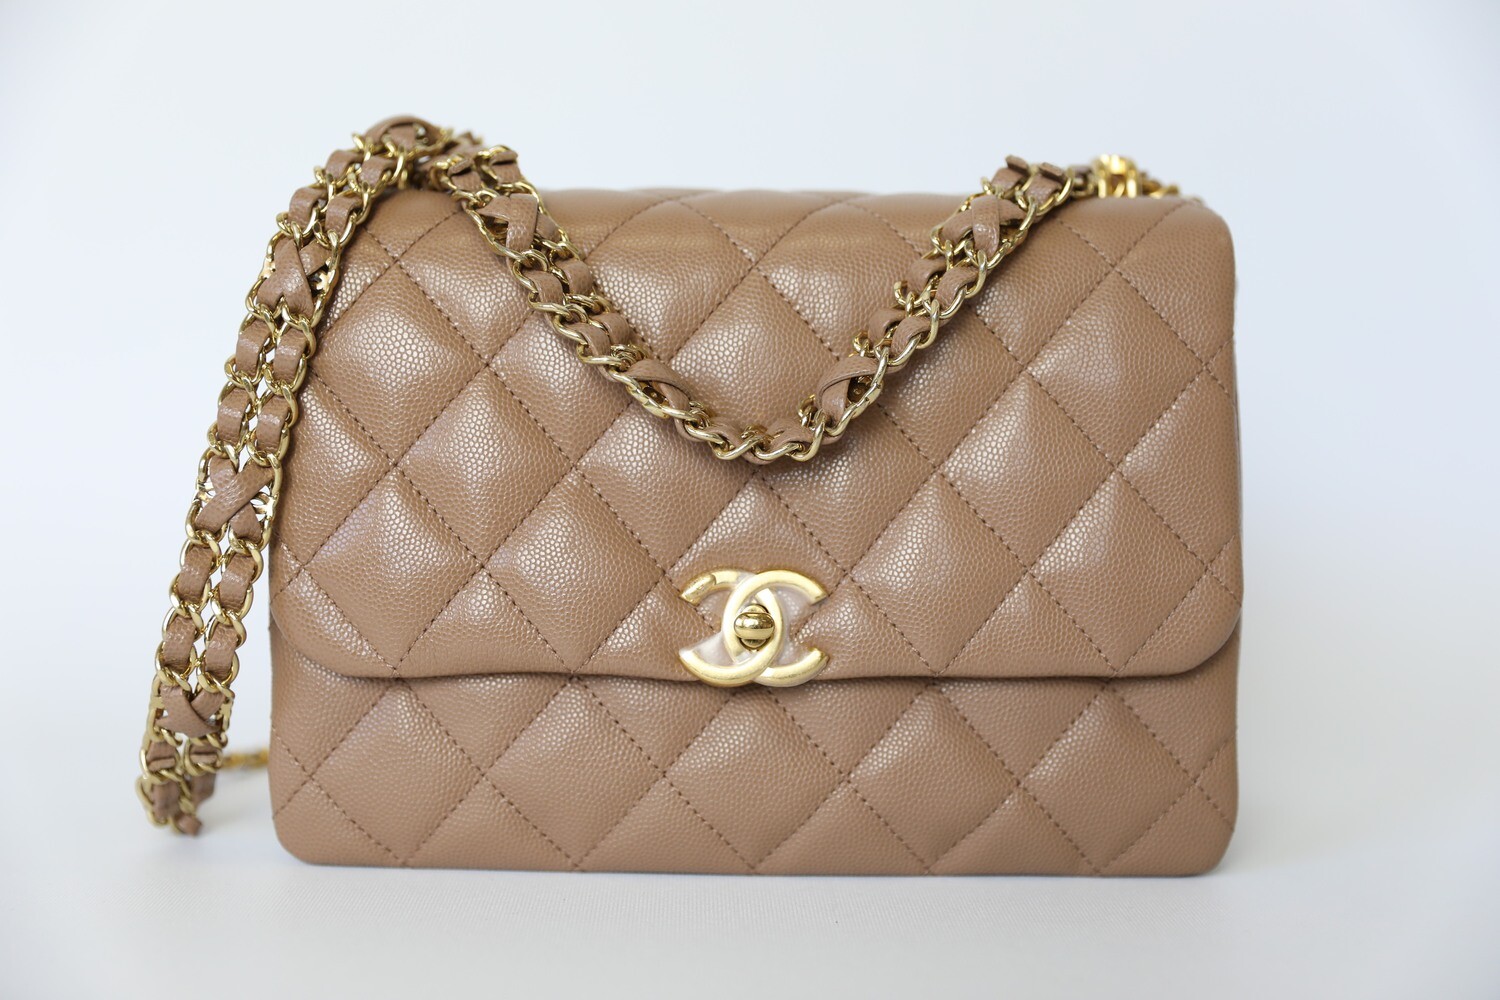 Chanel Coco First Flap Bag, Beige Caviar Leather With Gold Hardware,  Preowned In Dustbag WA001